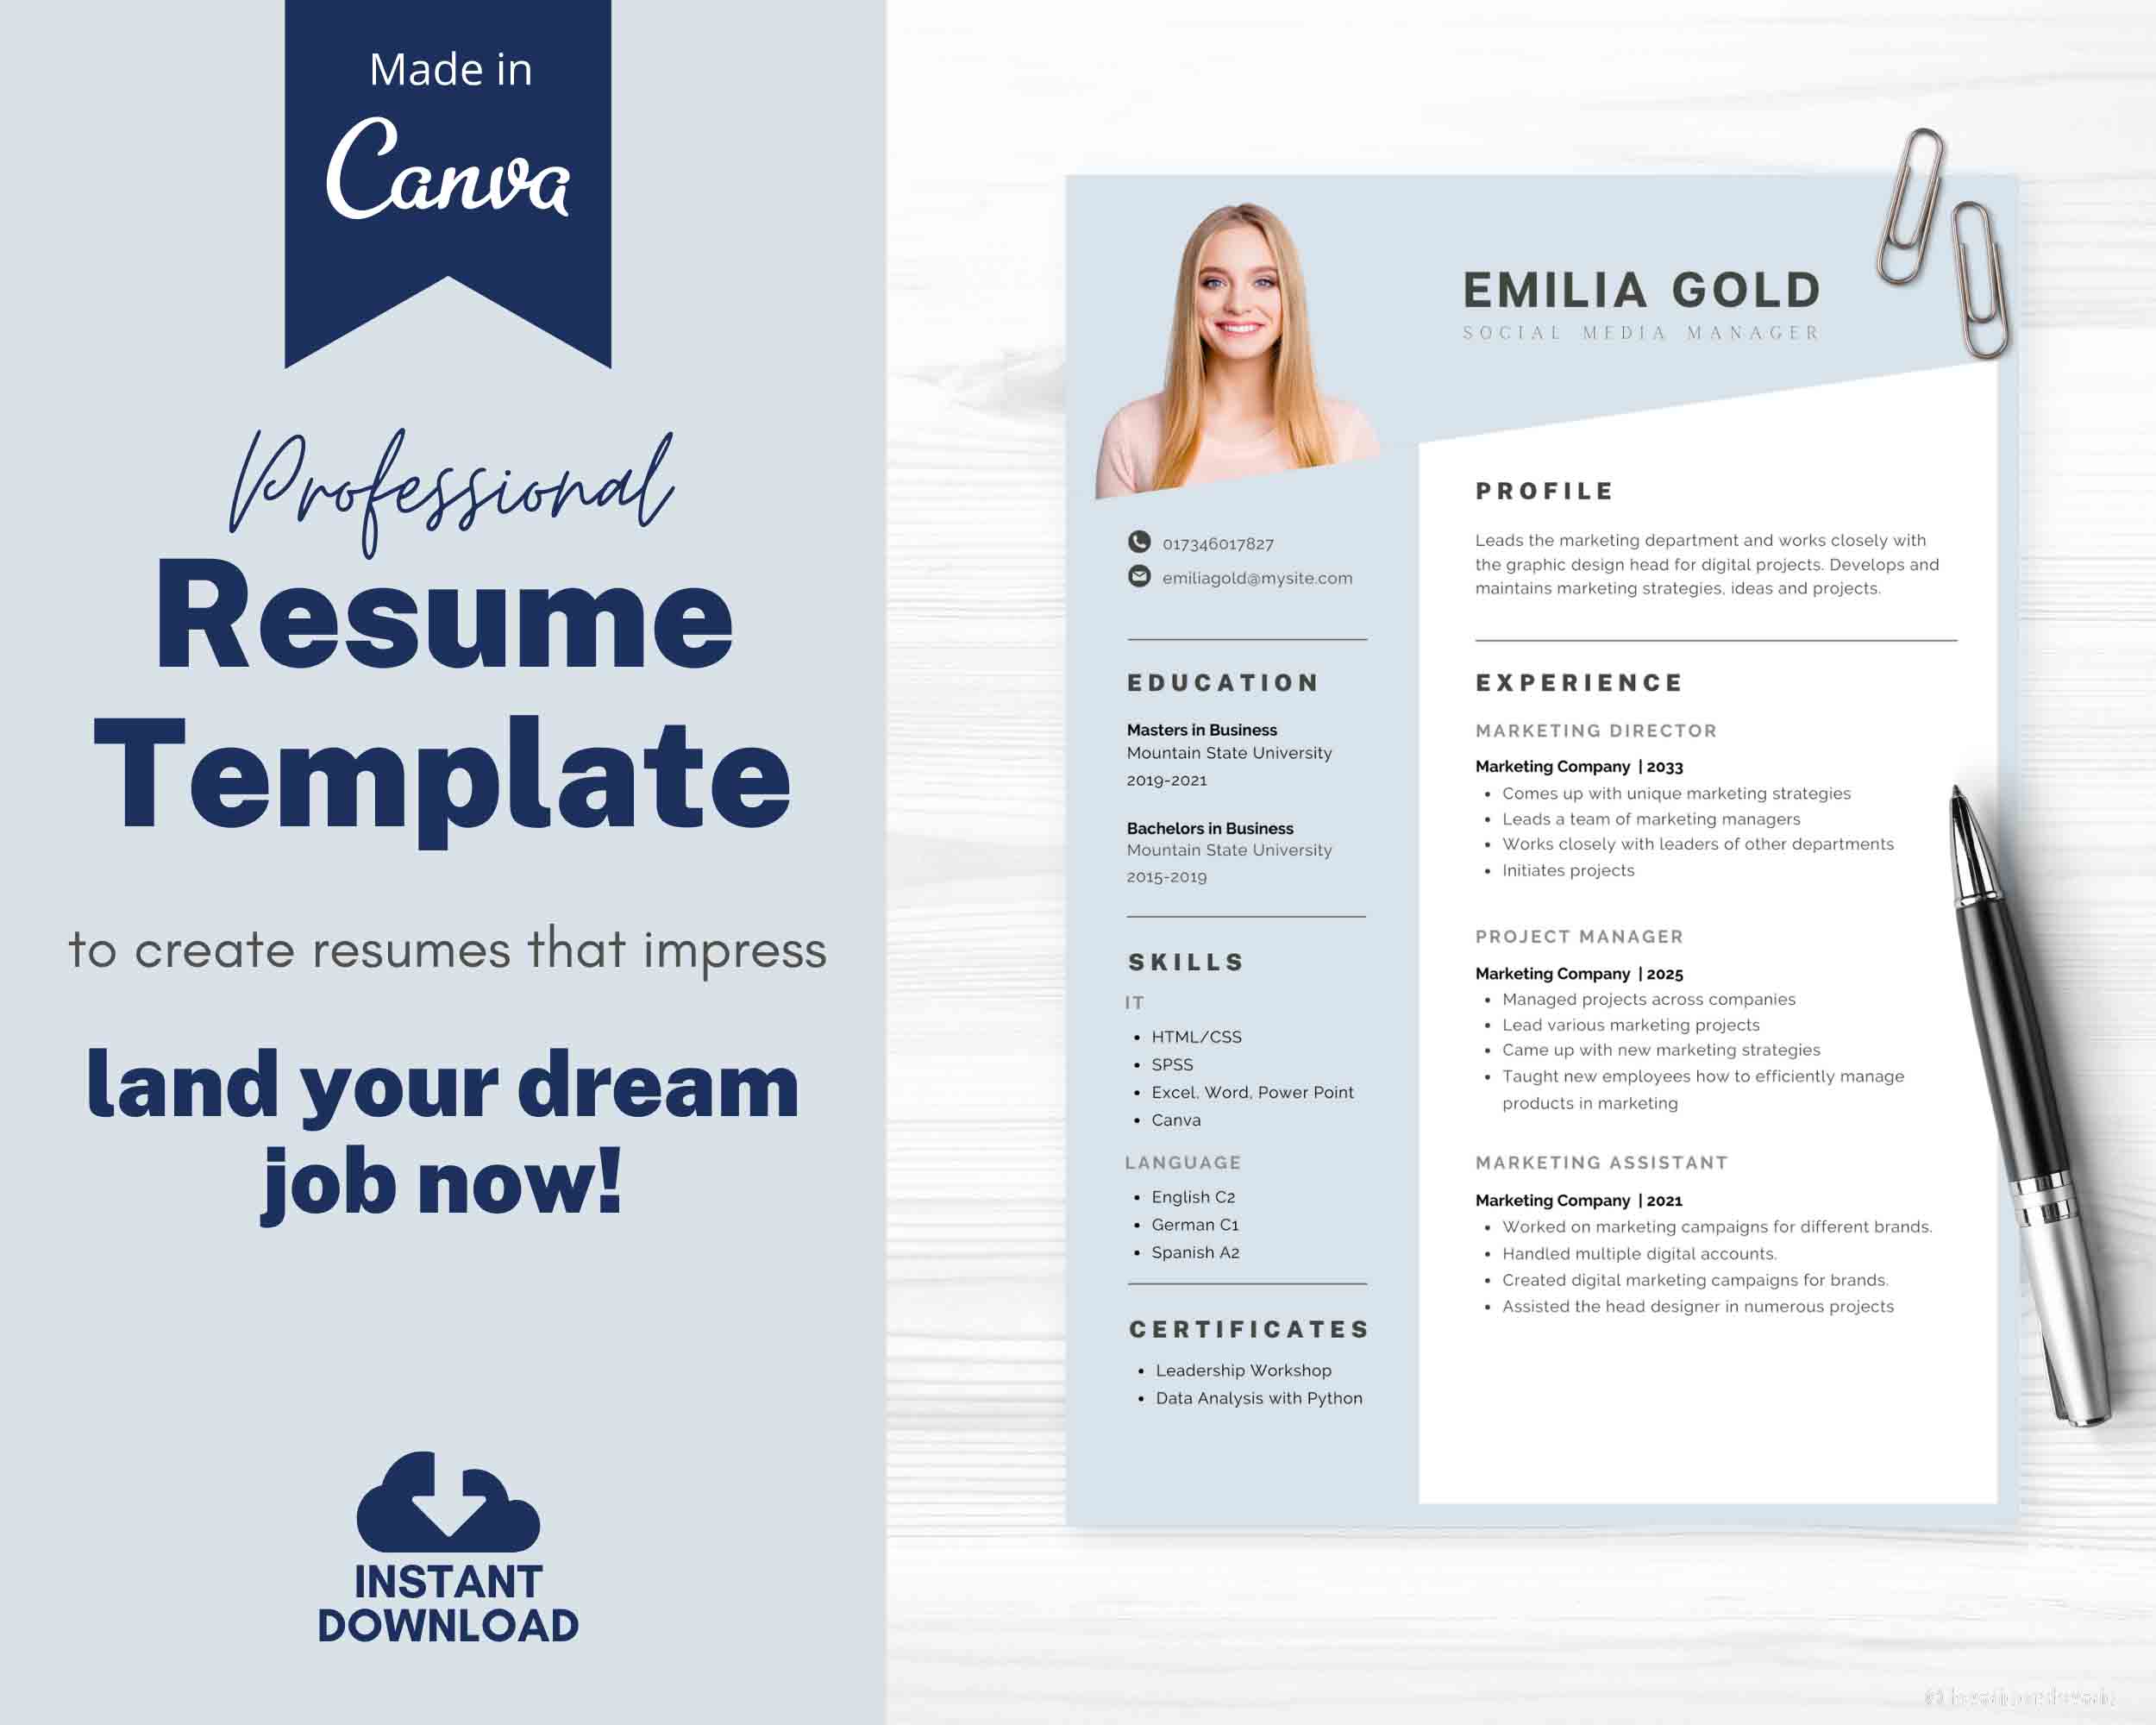 Professional Resume Template with Profile Picture